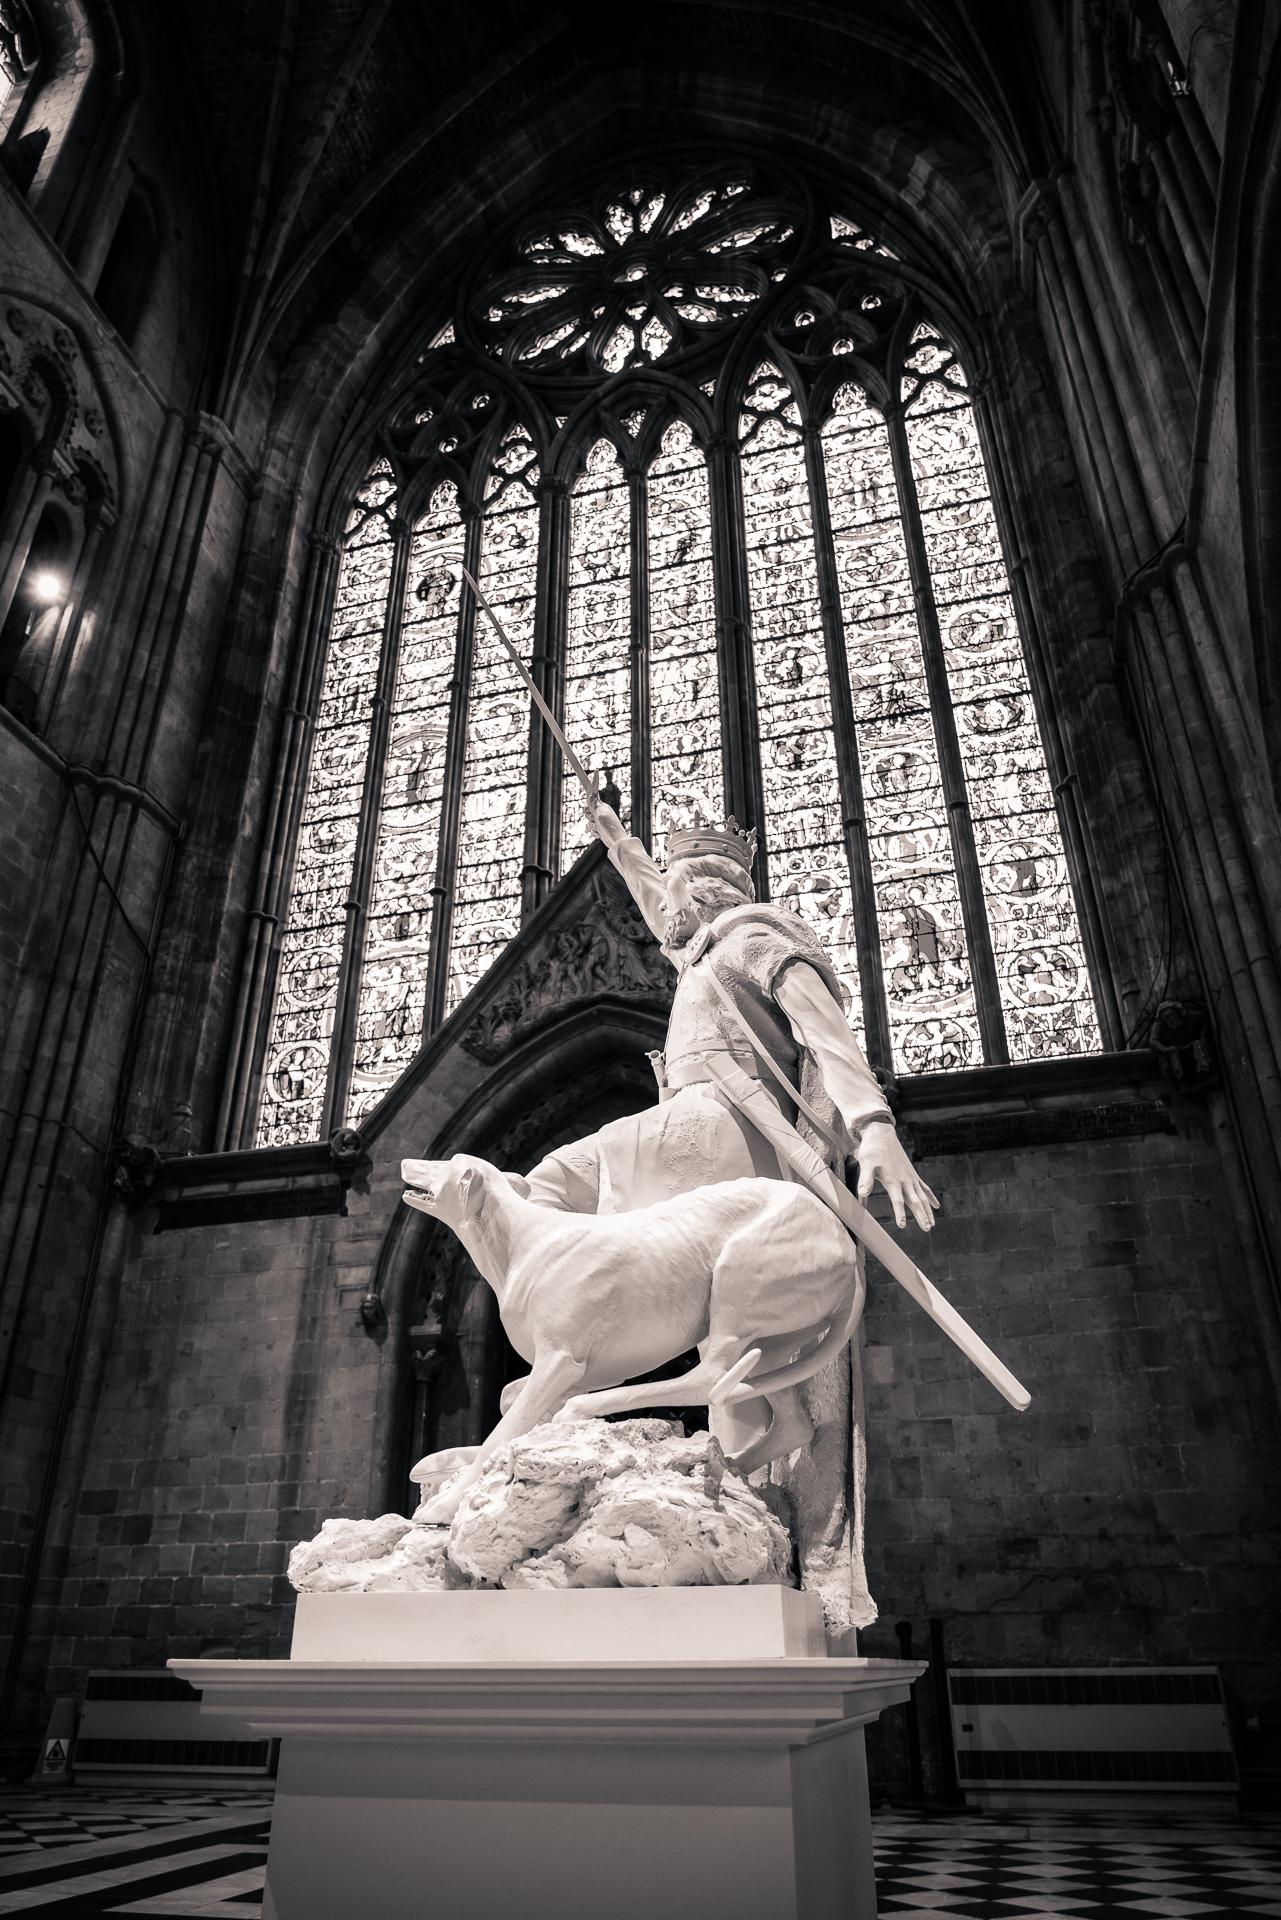 Llewelyn ab Iorwerth (Llewelyn the Great) - Baroque Sculpture by Barry Davies